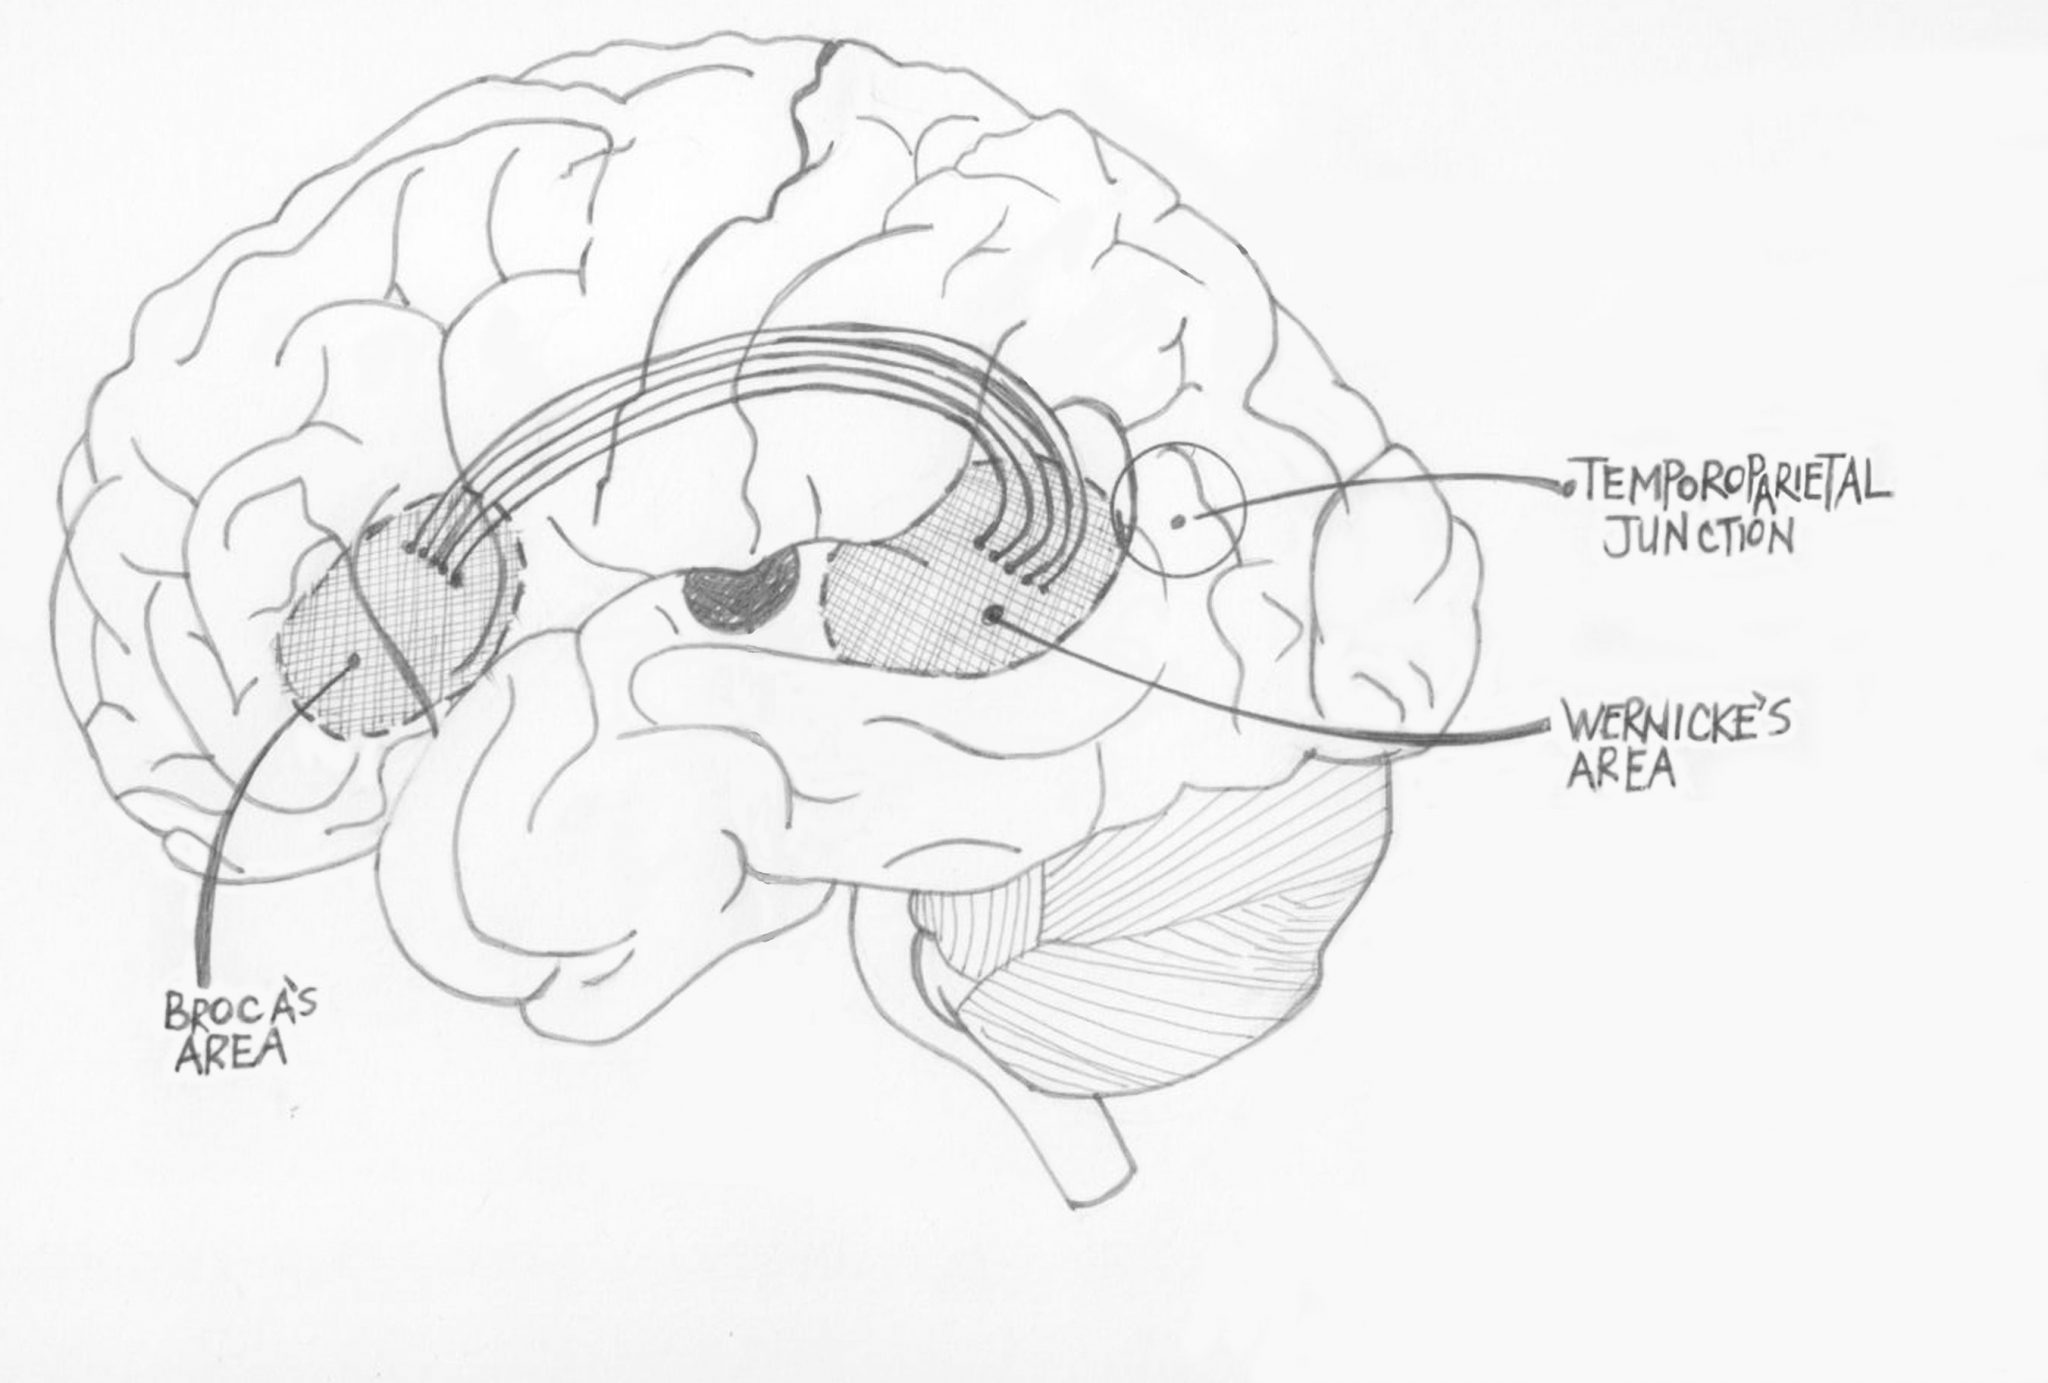 Diagram of the brain showing Broca's area, Wernicke's area and the temporoparietal junction.